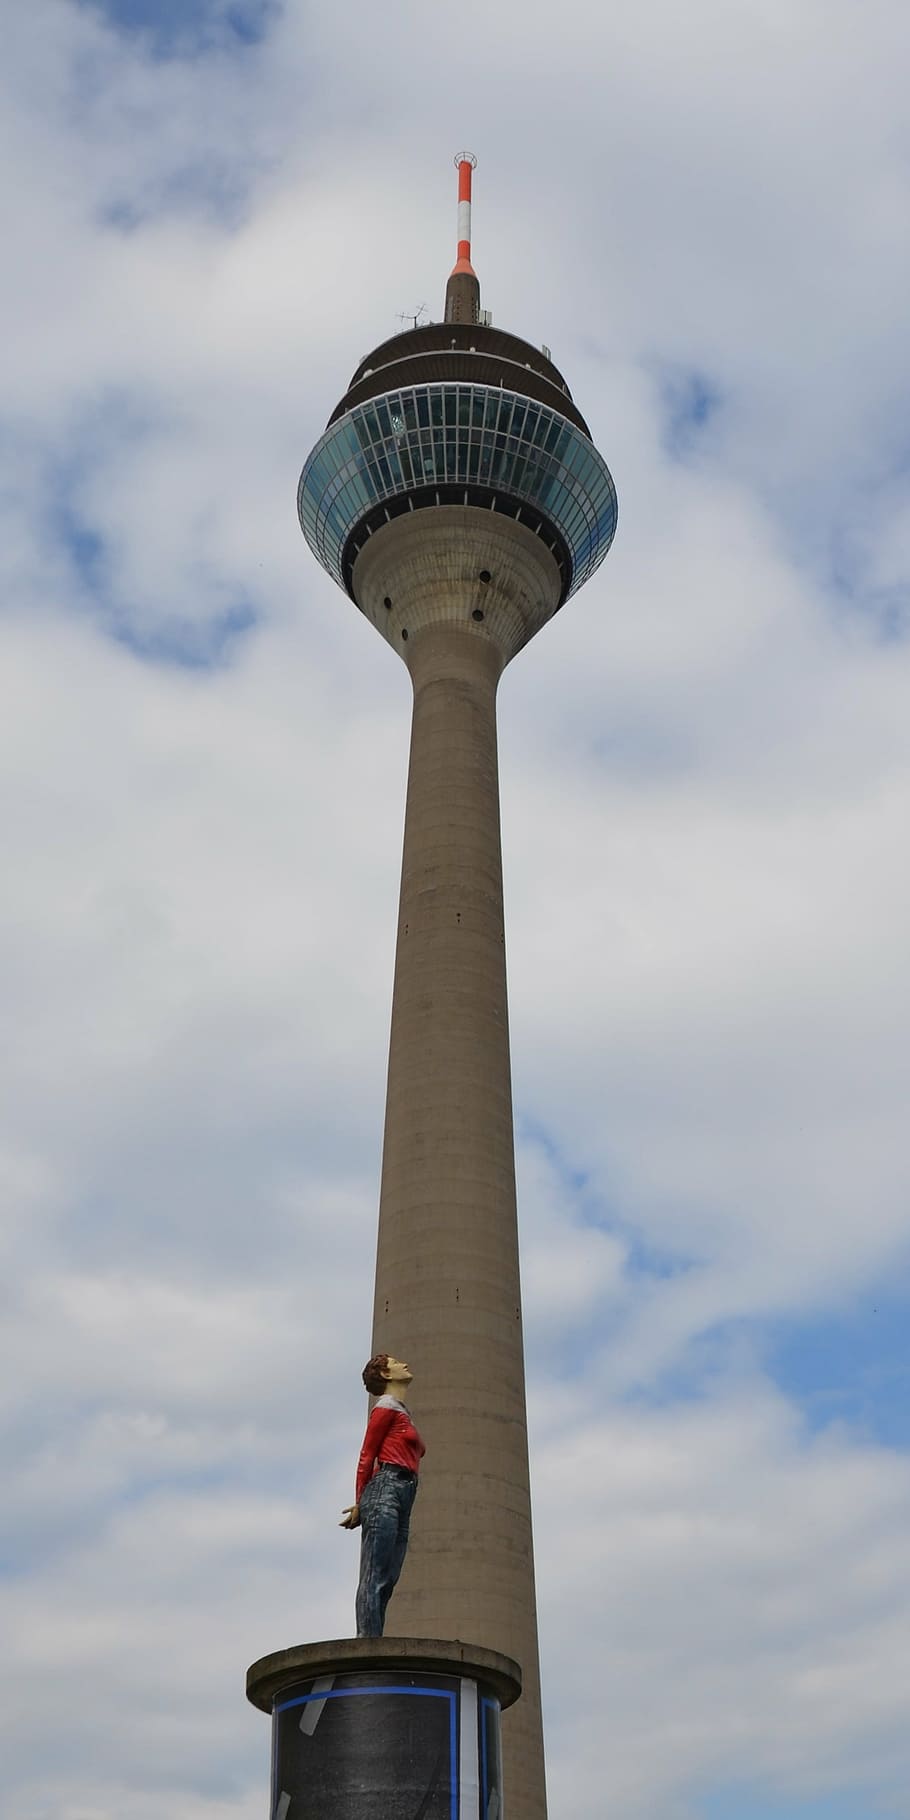 radio tower, architecture, modern, art, düsseldorf, television Tower - Berlin, tower, famous Place, communications Tower, sky